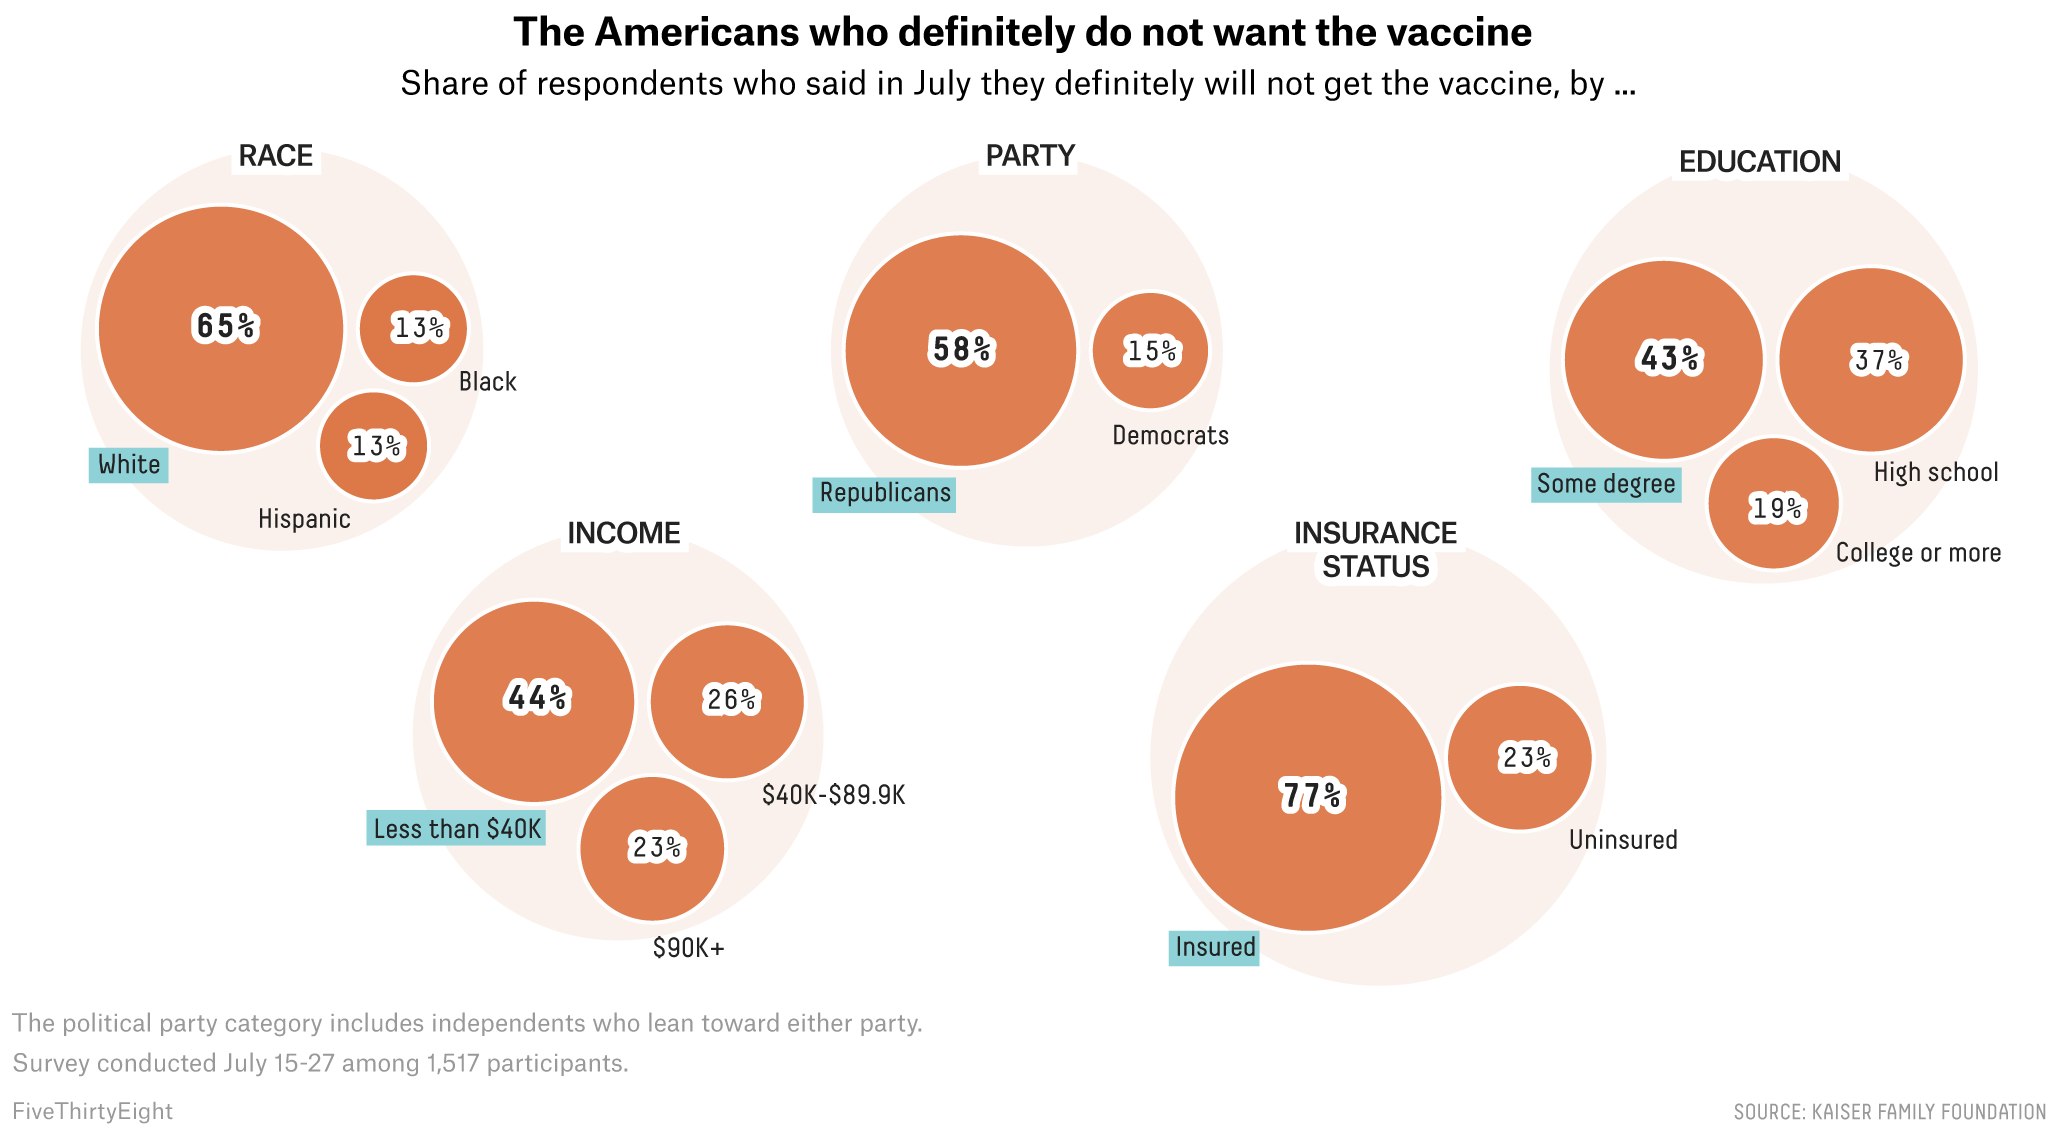 A visualisation titled 'The Americans who definitely do not want the vaccine' using a white, thick halo around the its data labels